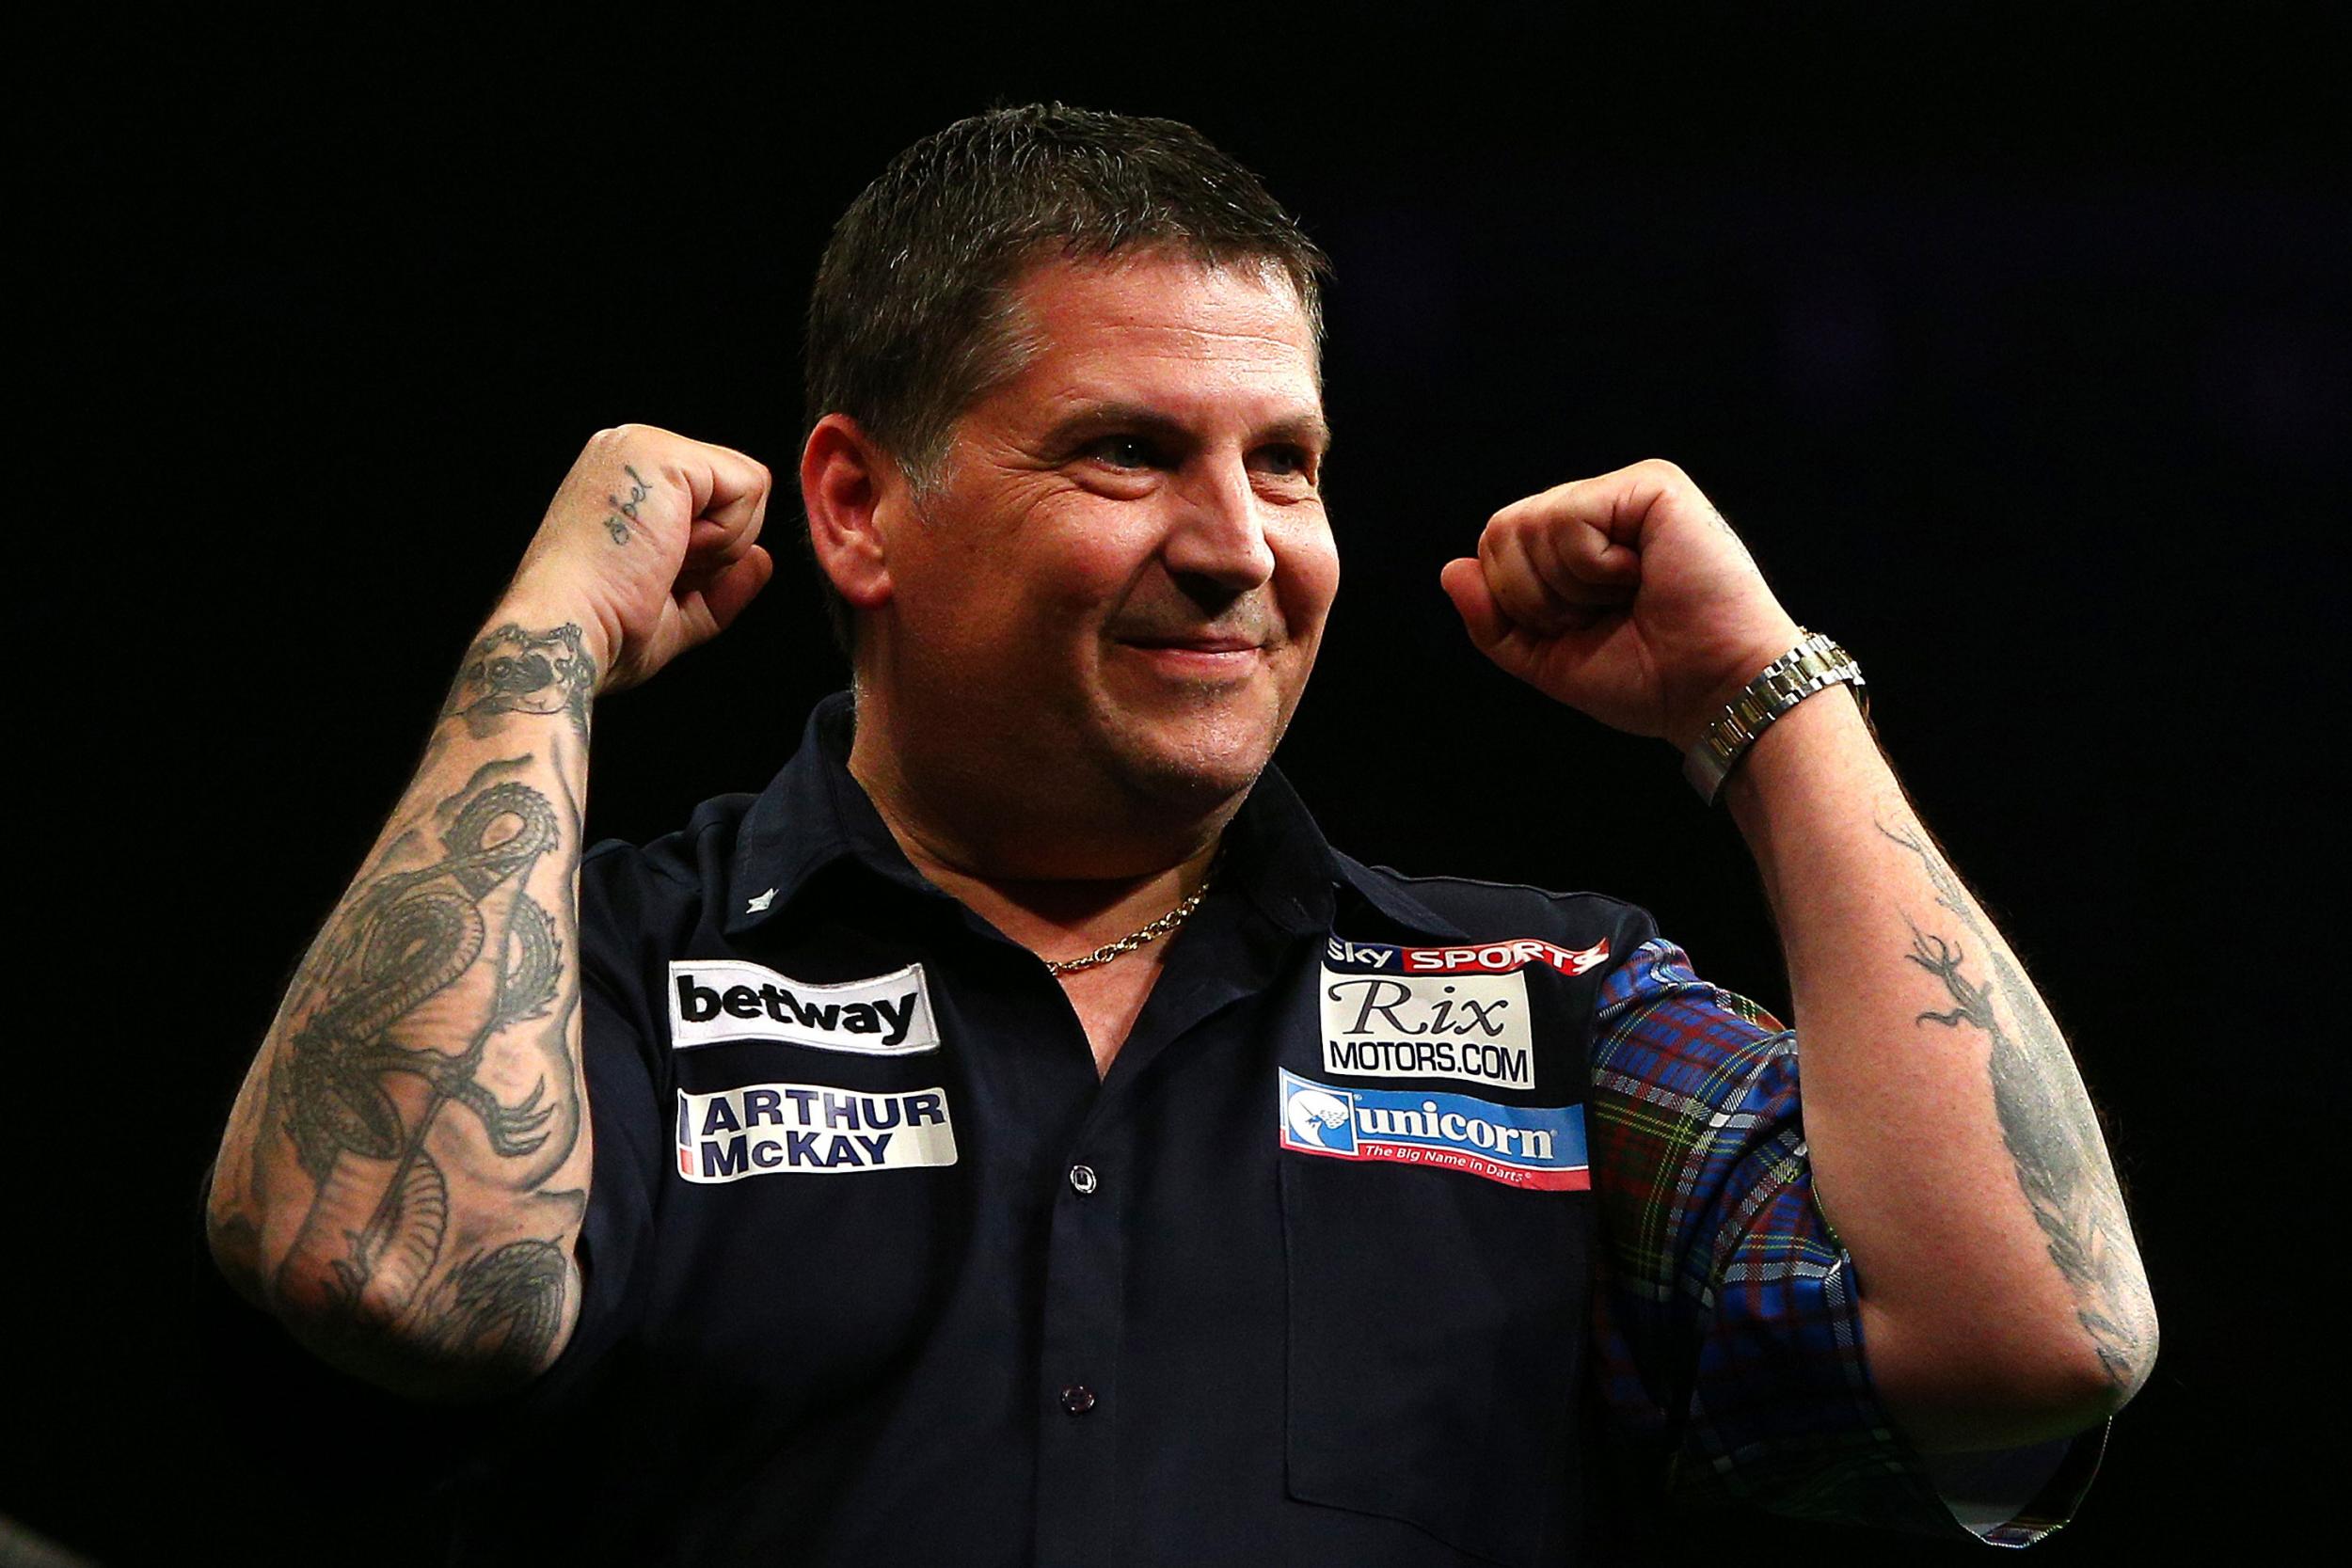 PDC World Darts Championship day 1 preview: What time does it